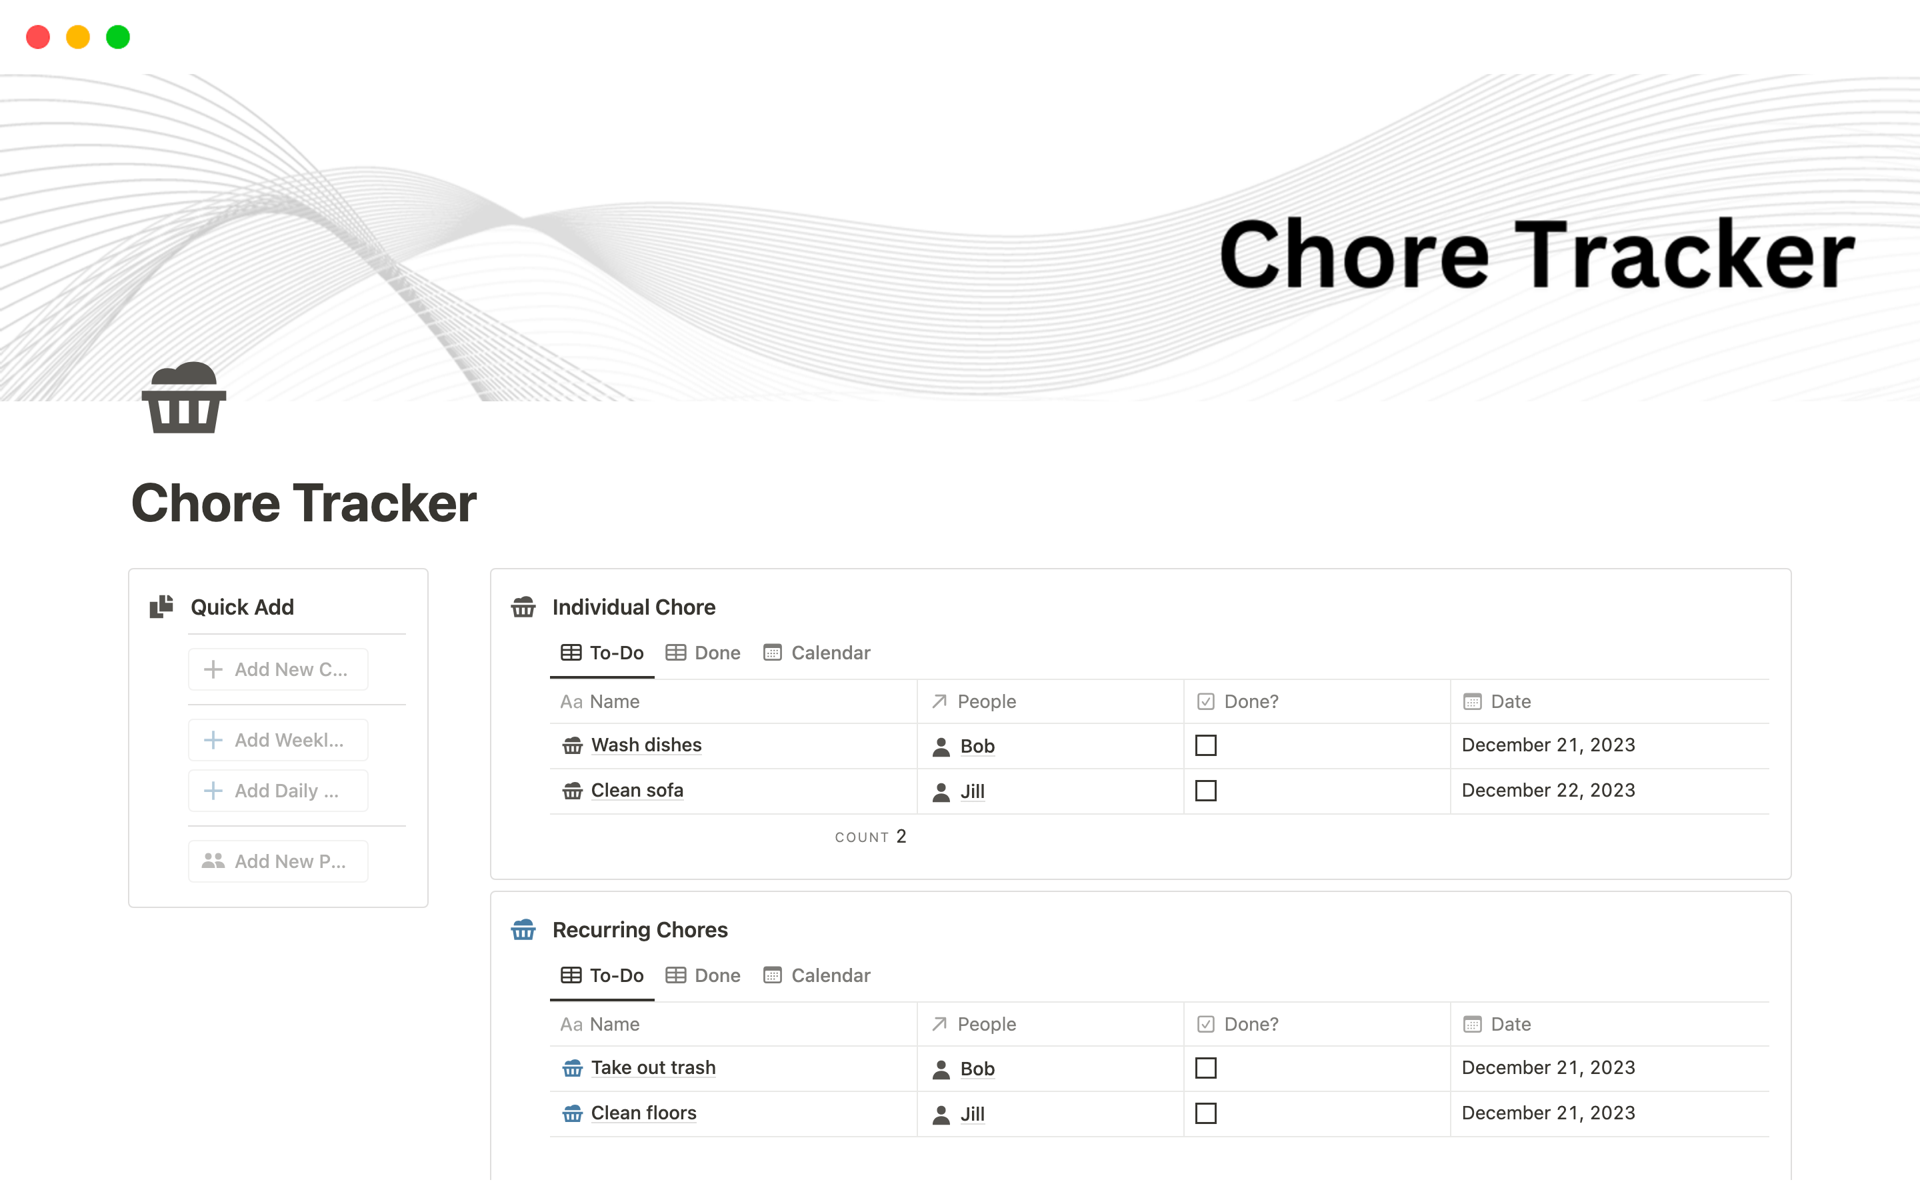 Tracks all chores for the entire family all in one easy place